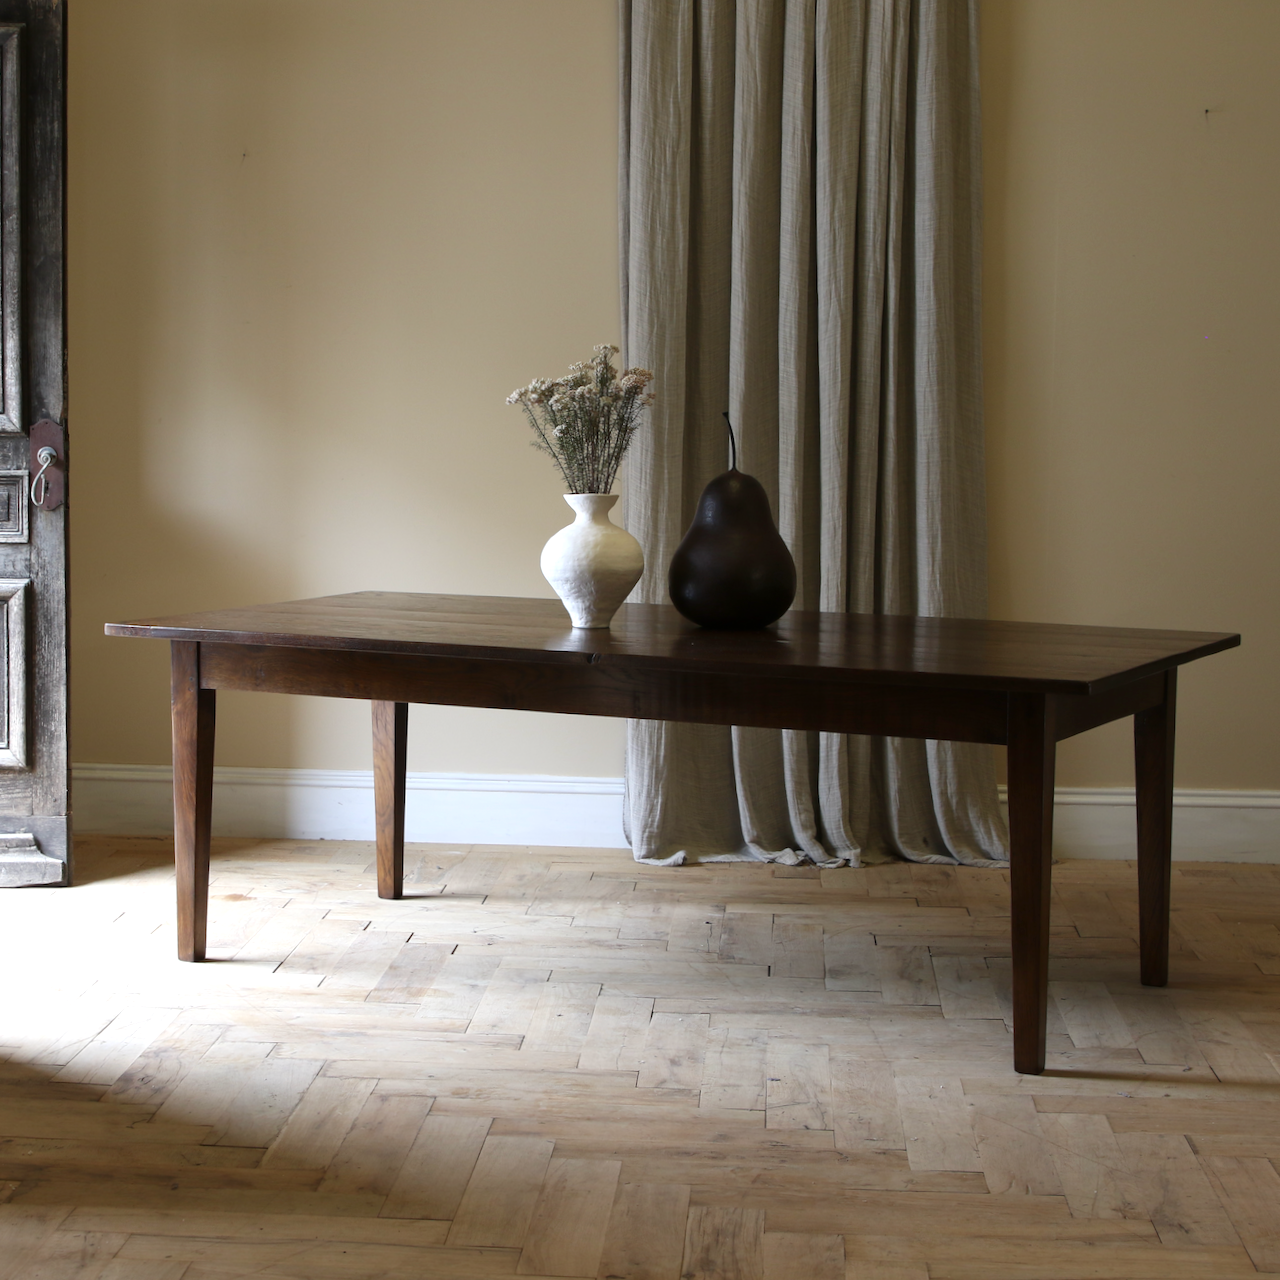 136-31 - Tapered Leg Dining Table // Length 2.2m